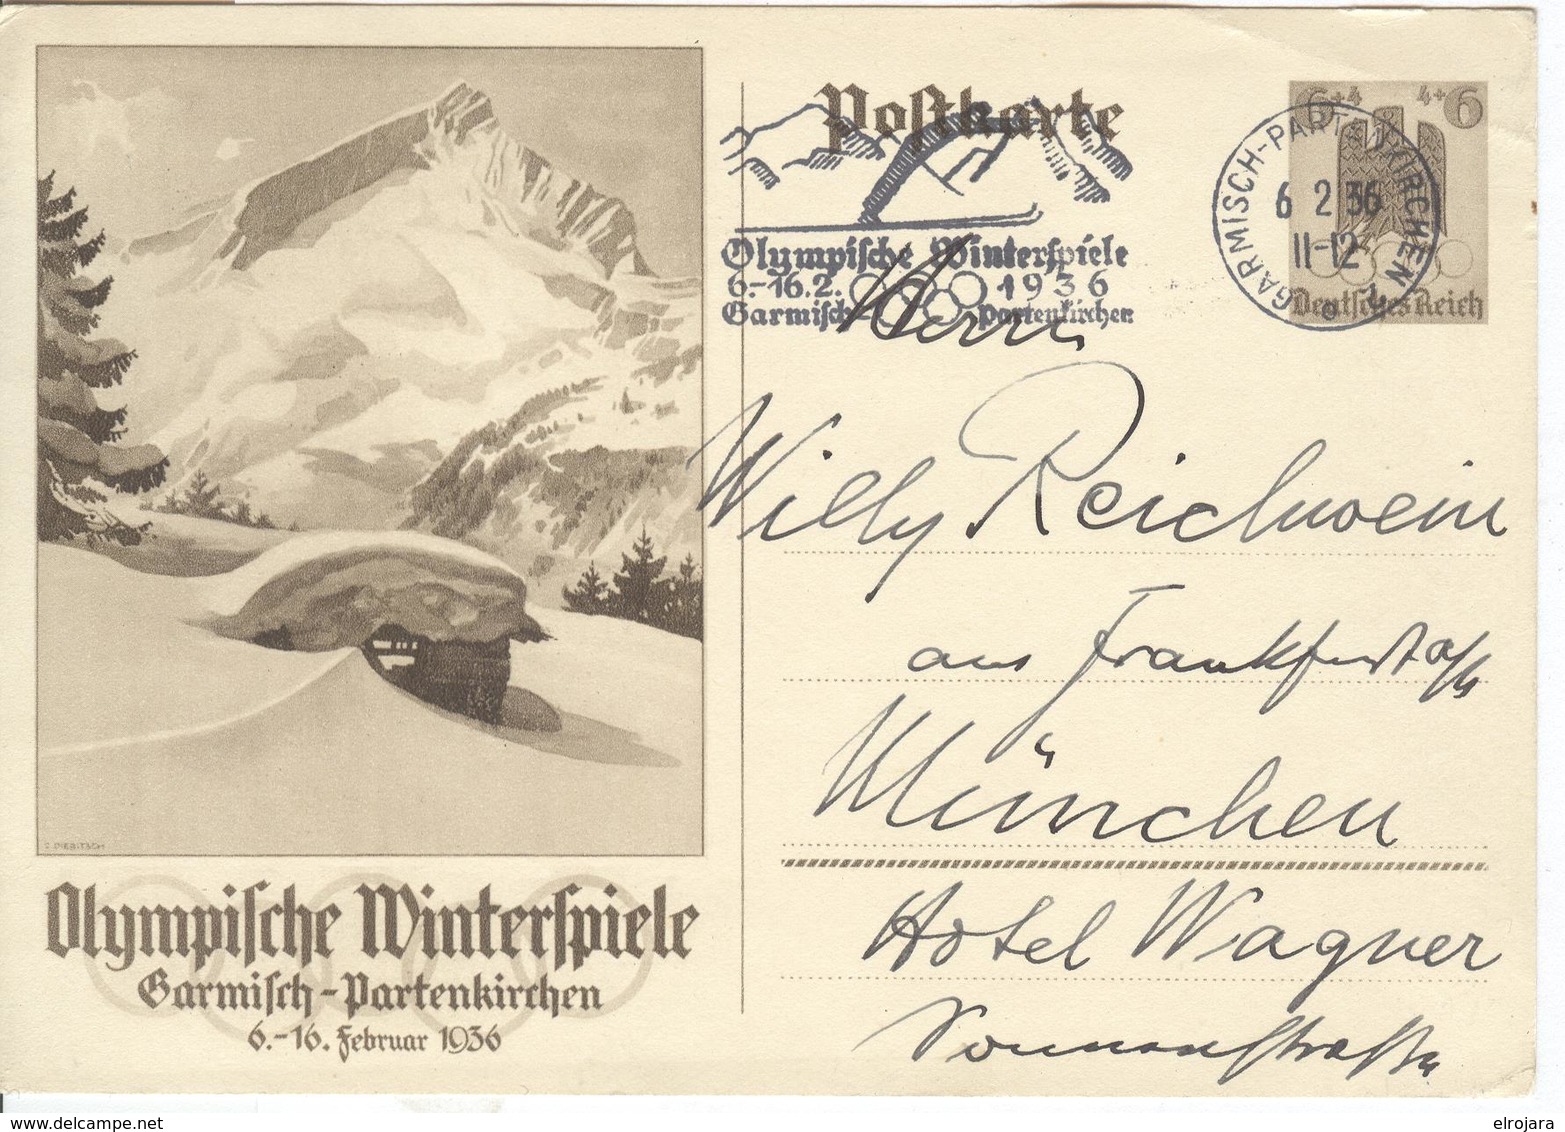 GERMANY Olympic Stationery With Olympic Single Ring Machine Cancel Garmisch-Partenkirchen 6.2.36 Opening Day - Inverno1936: Garmisch-Partenkirchen